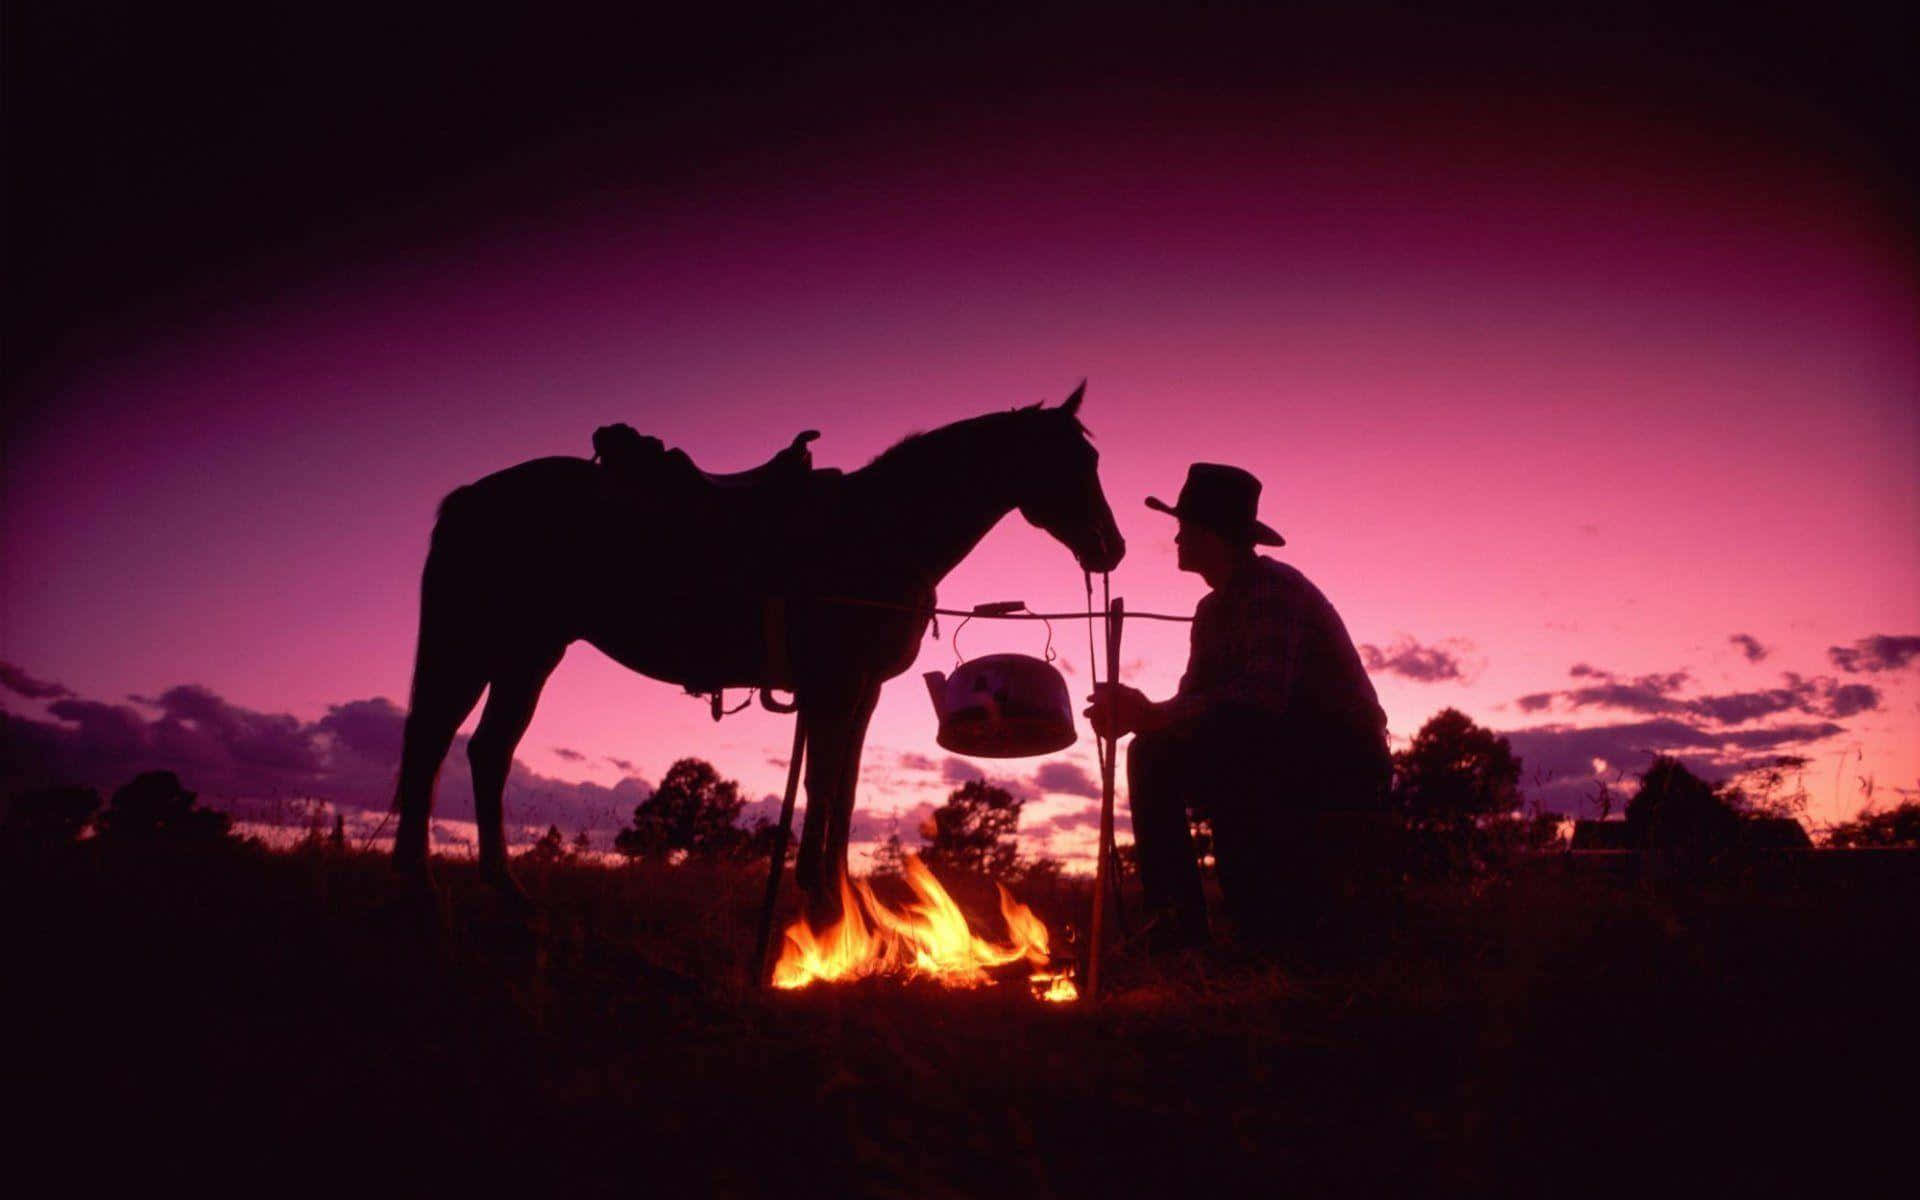 A Mesmerizing Sunset at the Cowboy Ranch